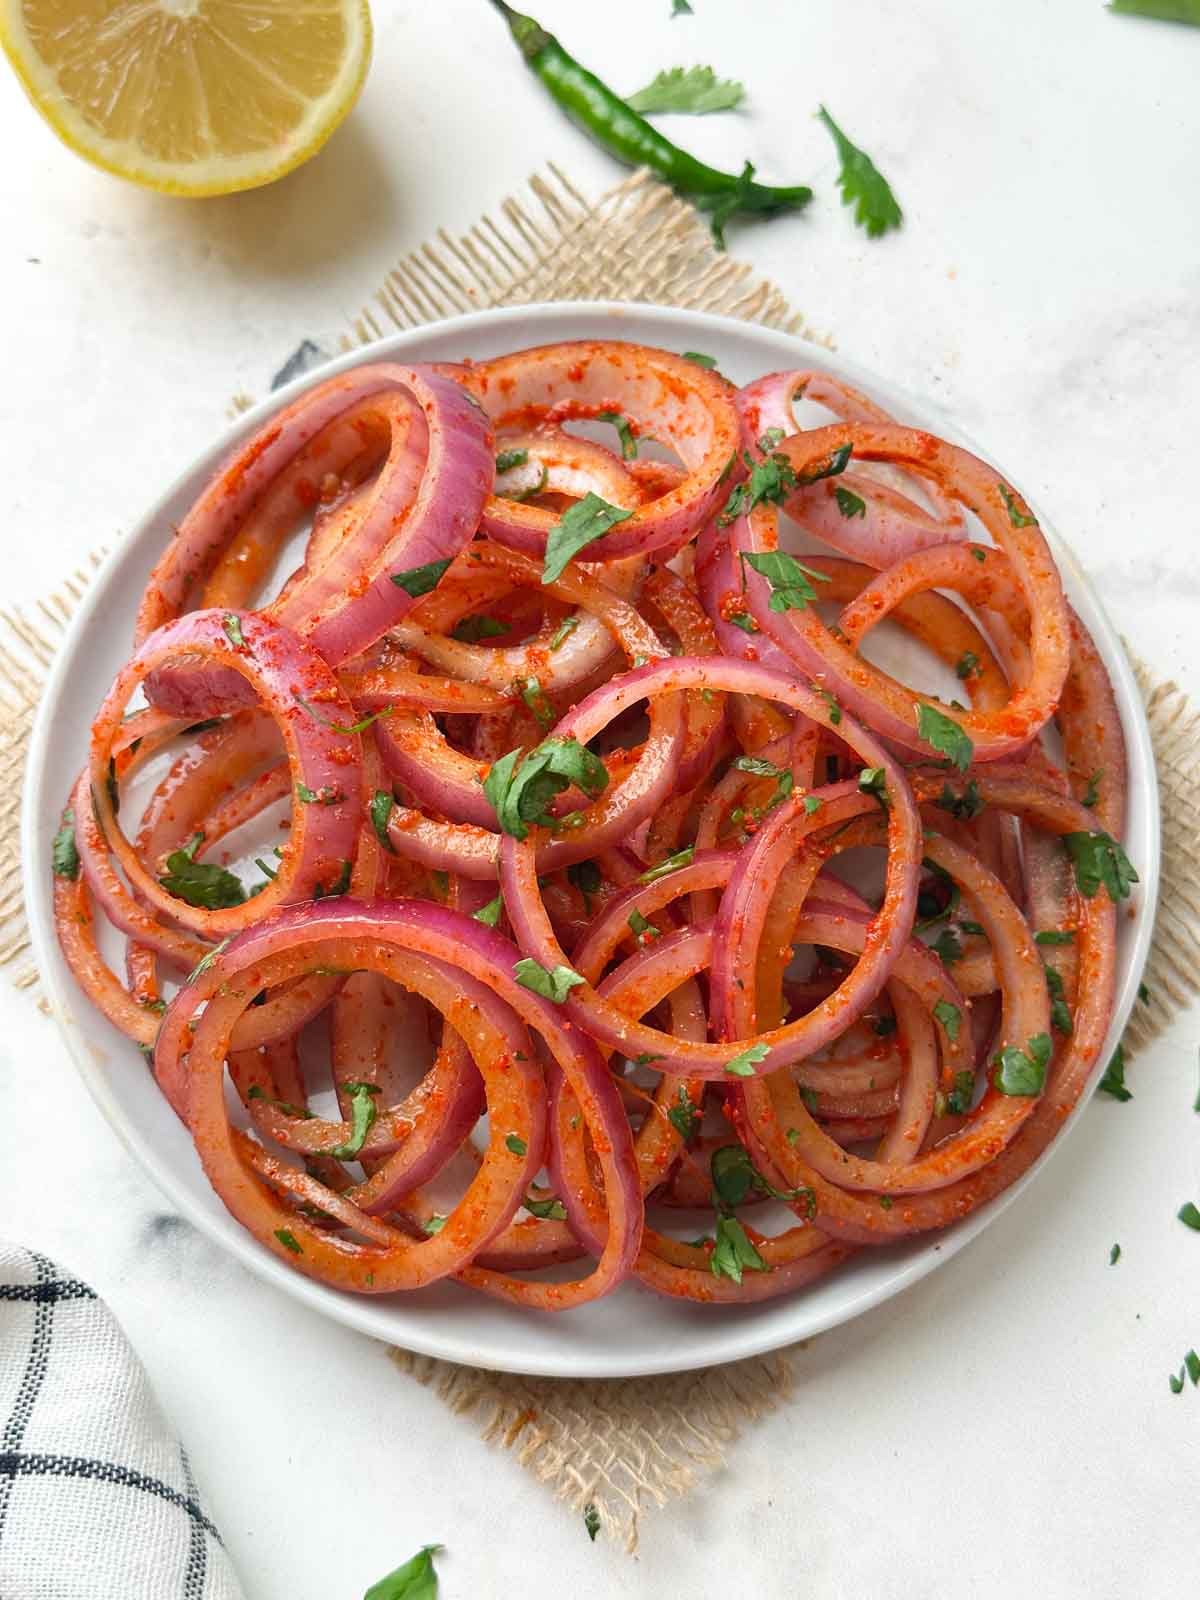 laccha pyaaz (indian onion salad) served on a plate with slice of lemon and green chili on the side